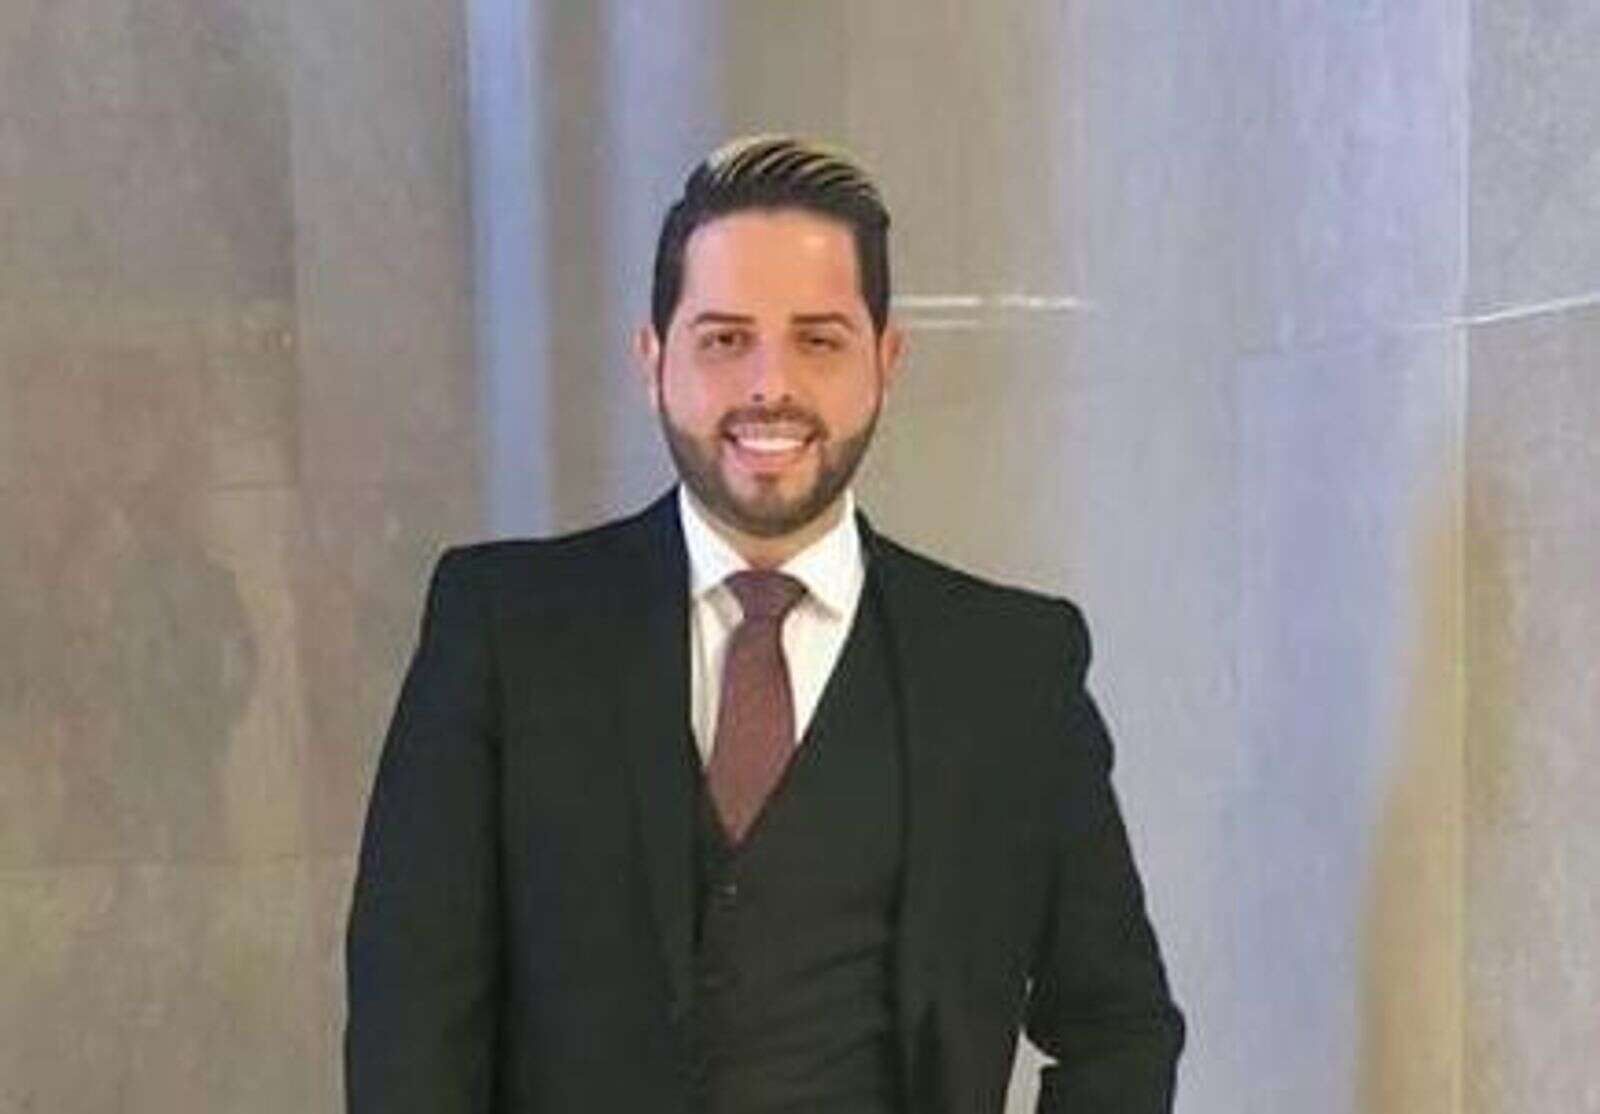 Young Lawyer Lázaro Rodríguez Navarro Dies Suddenly While Working in Bayamón – A Heartbreaking Loss for the Legal Community